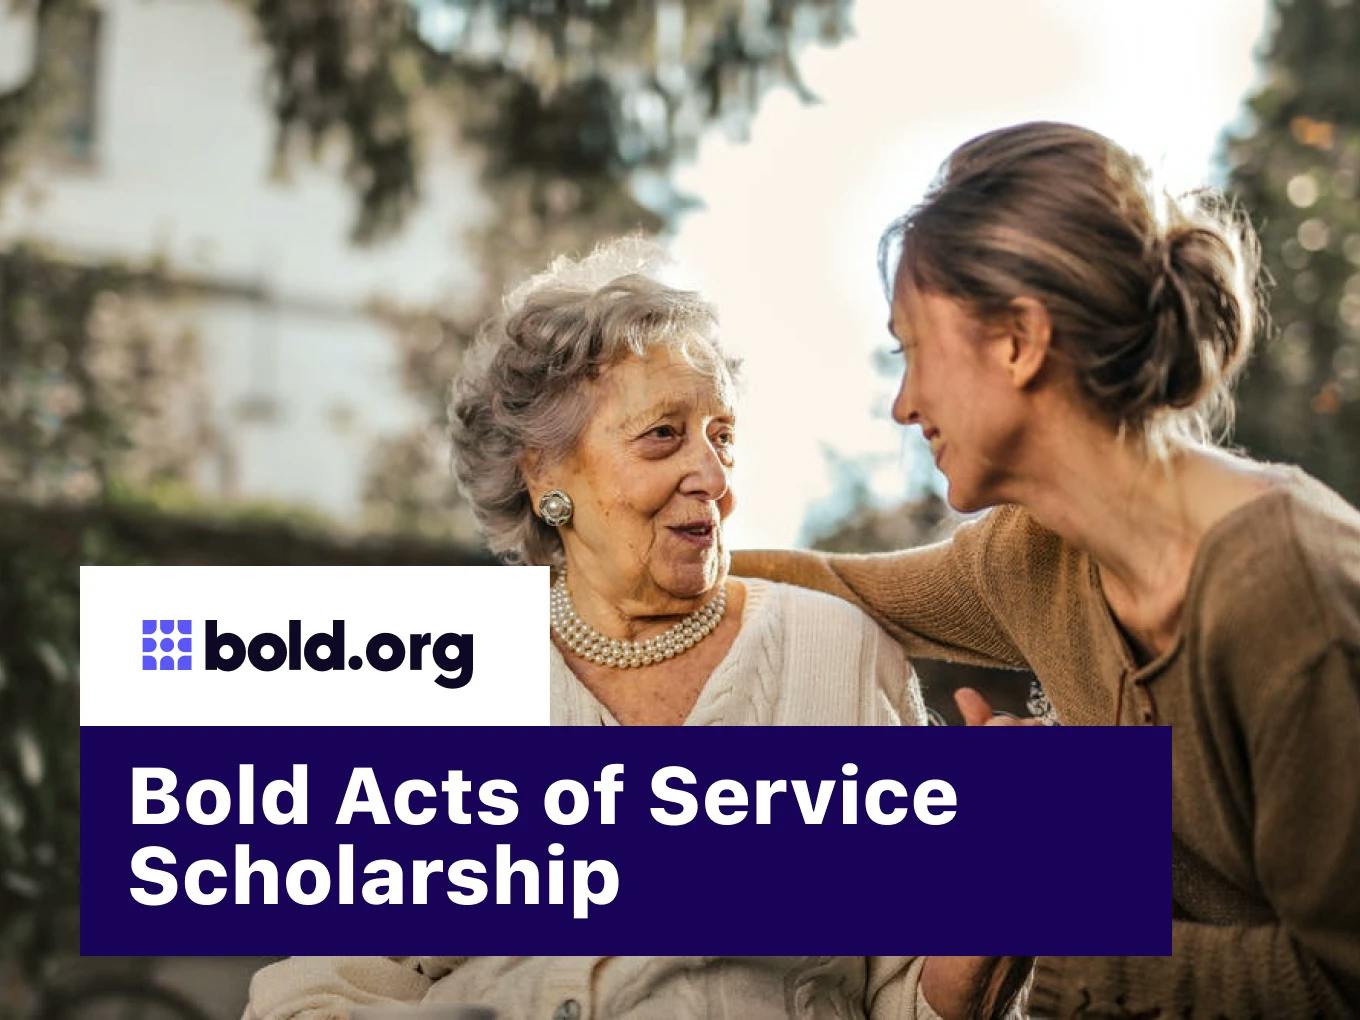 Bold Acts of Service Scholarship